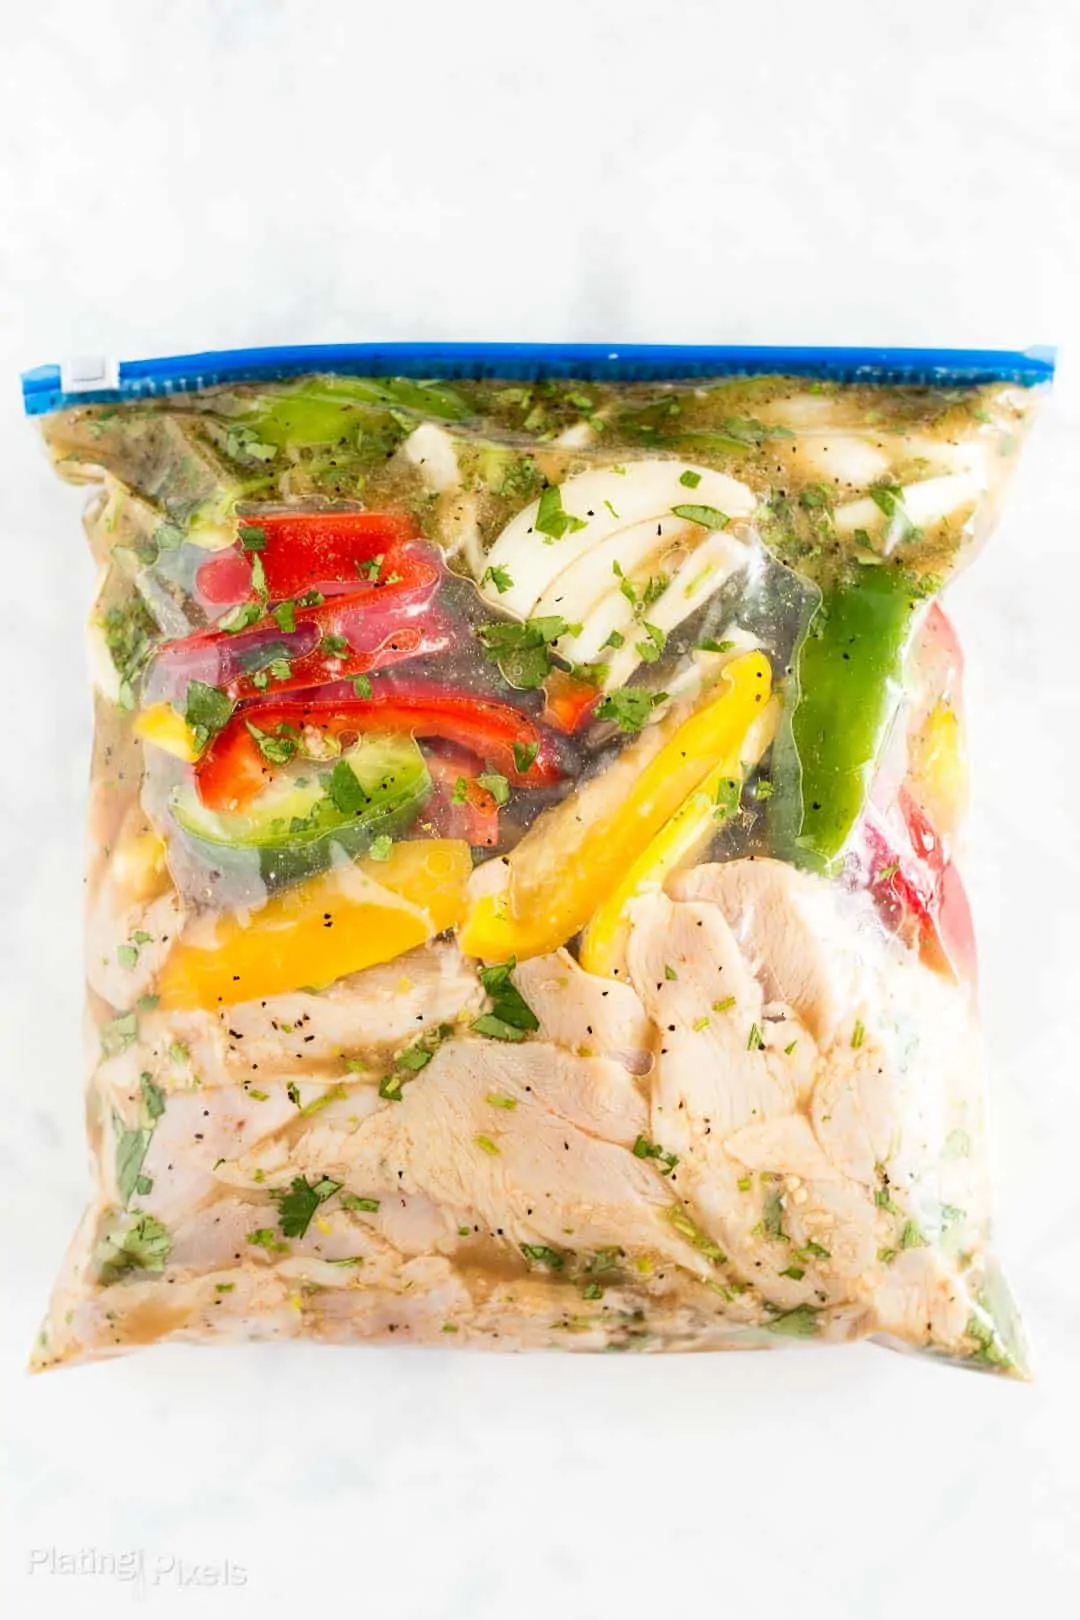 Process shot of chicken and vegetables marinating in a bag to make fajitas